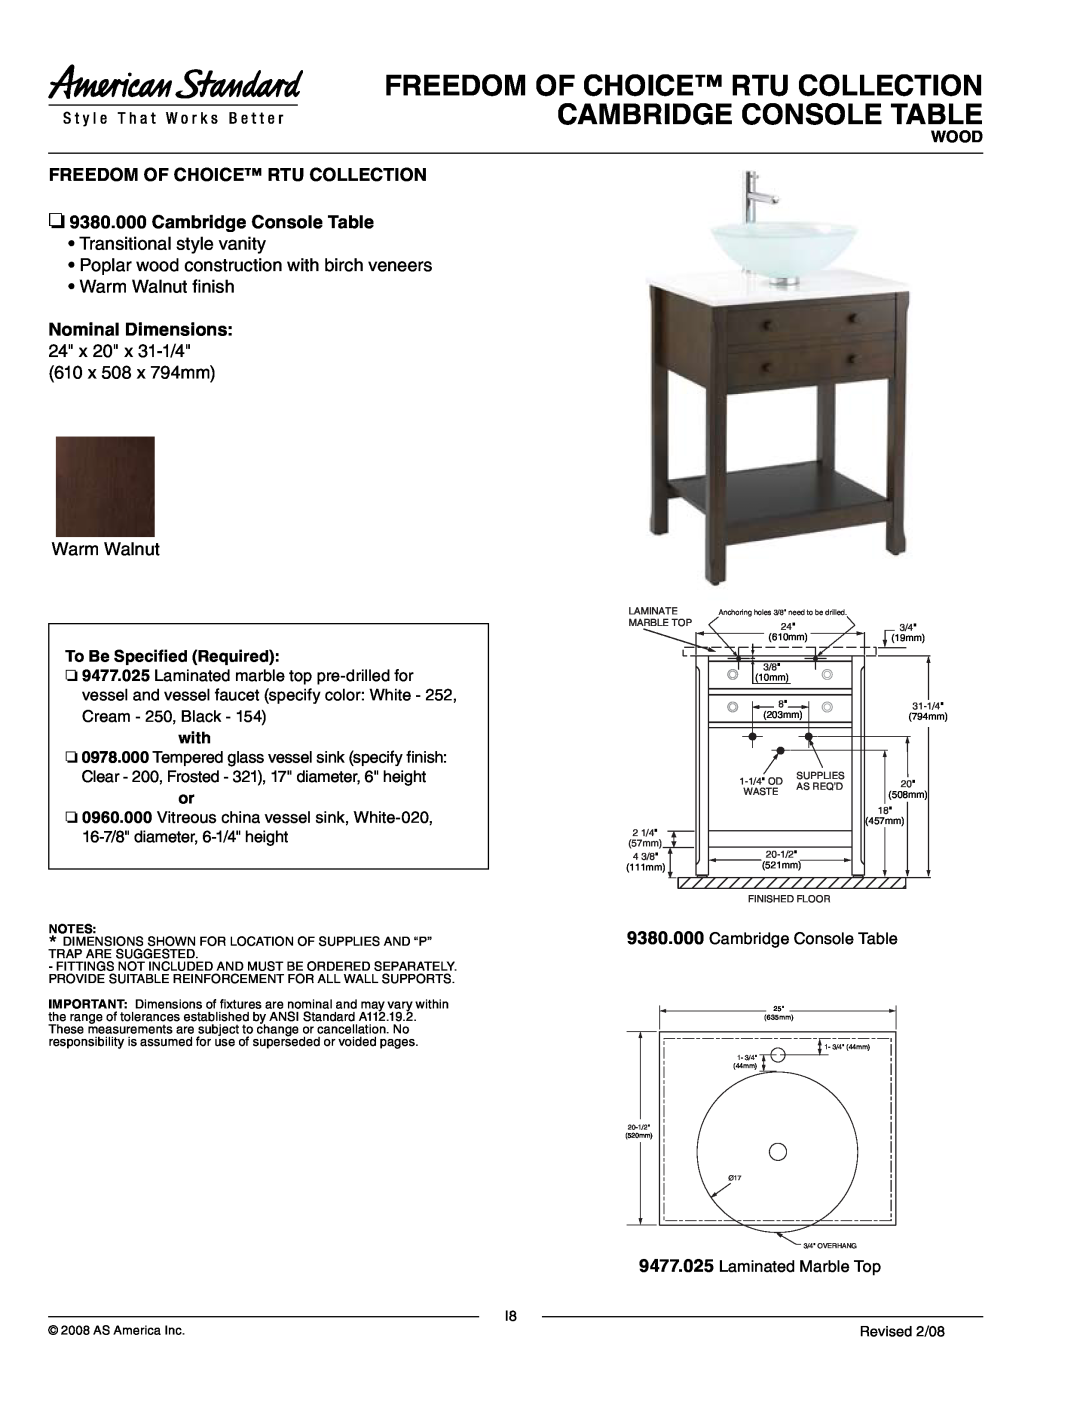 American Standard 9380.000 dimensions Freedom Of Choice Rtu Collection, Cambridge Console Table, Transitional style vanity 